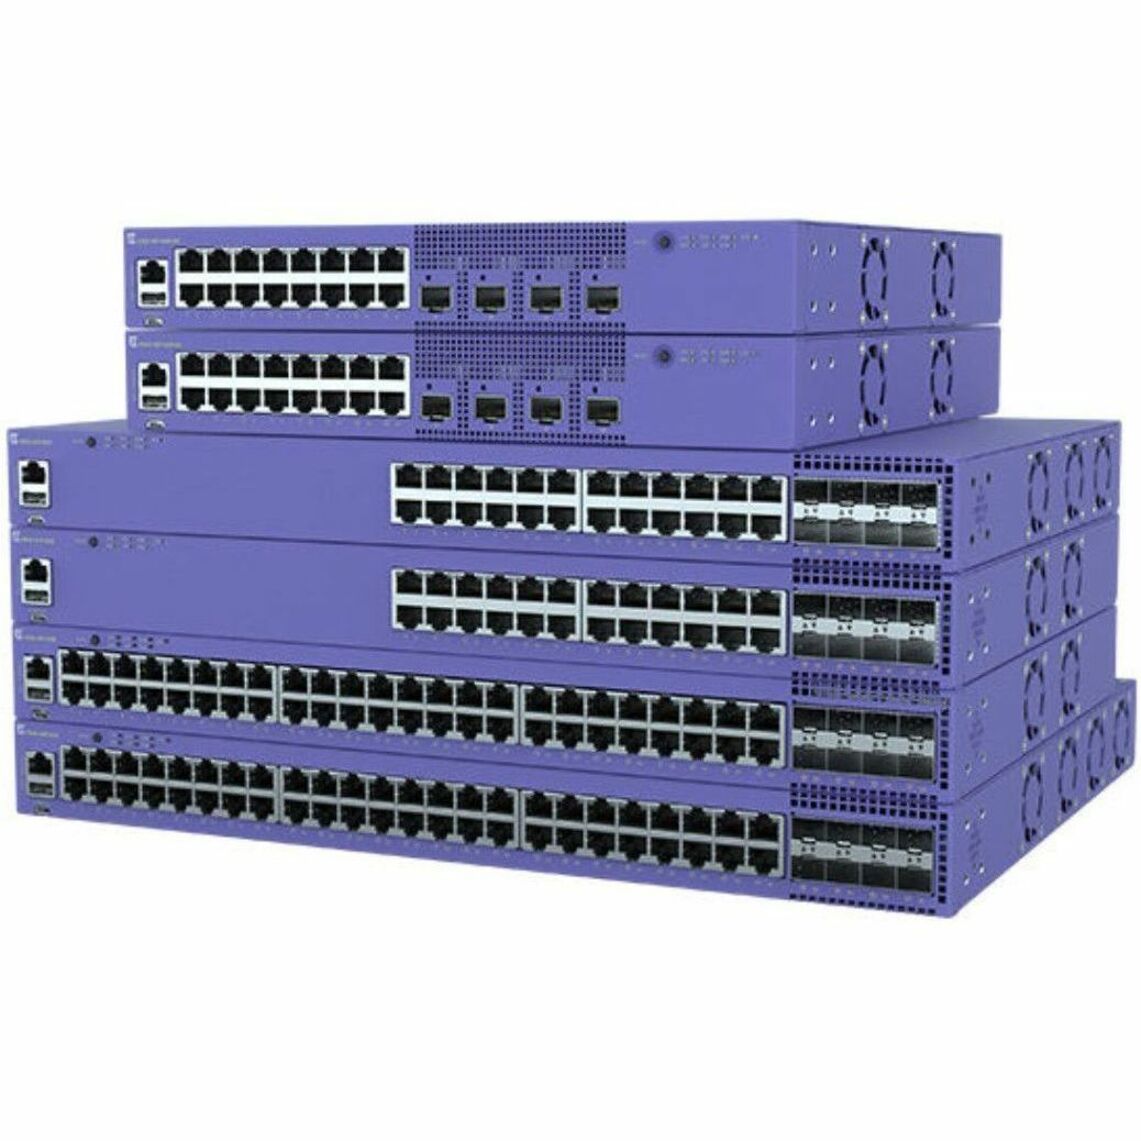 Extreme Networks 5320-24P-8XE ExtremeSwitching Ethernet Switch 24 Gigabit Ethernet PoE+ 8 10 Gigabit Ethernet Expansion Slots